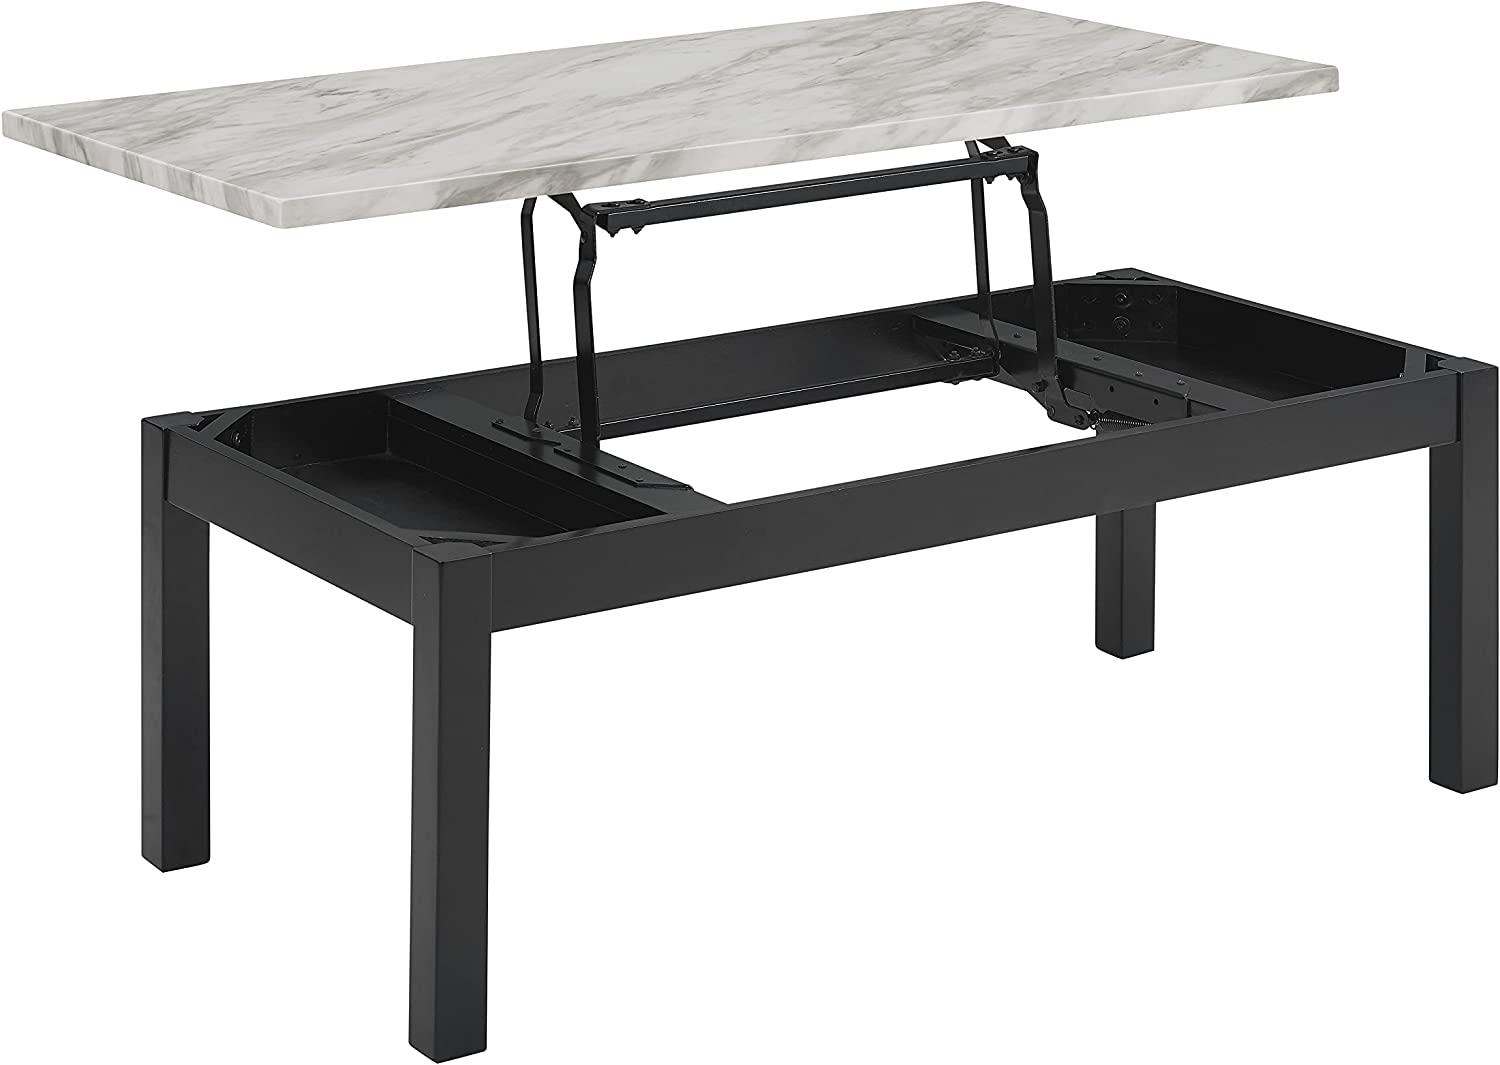 Faux Marble 3 Piece Table set with 2 ends and one lift top coffee table